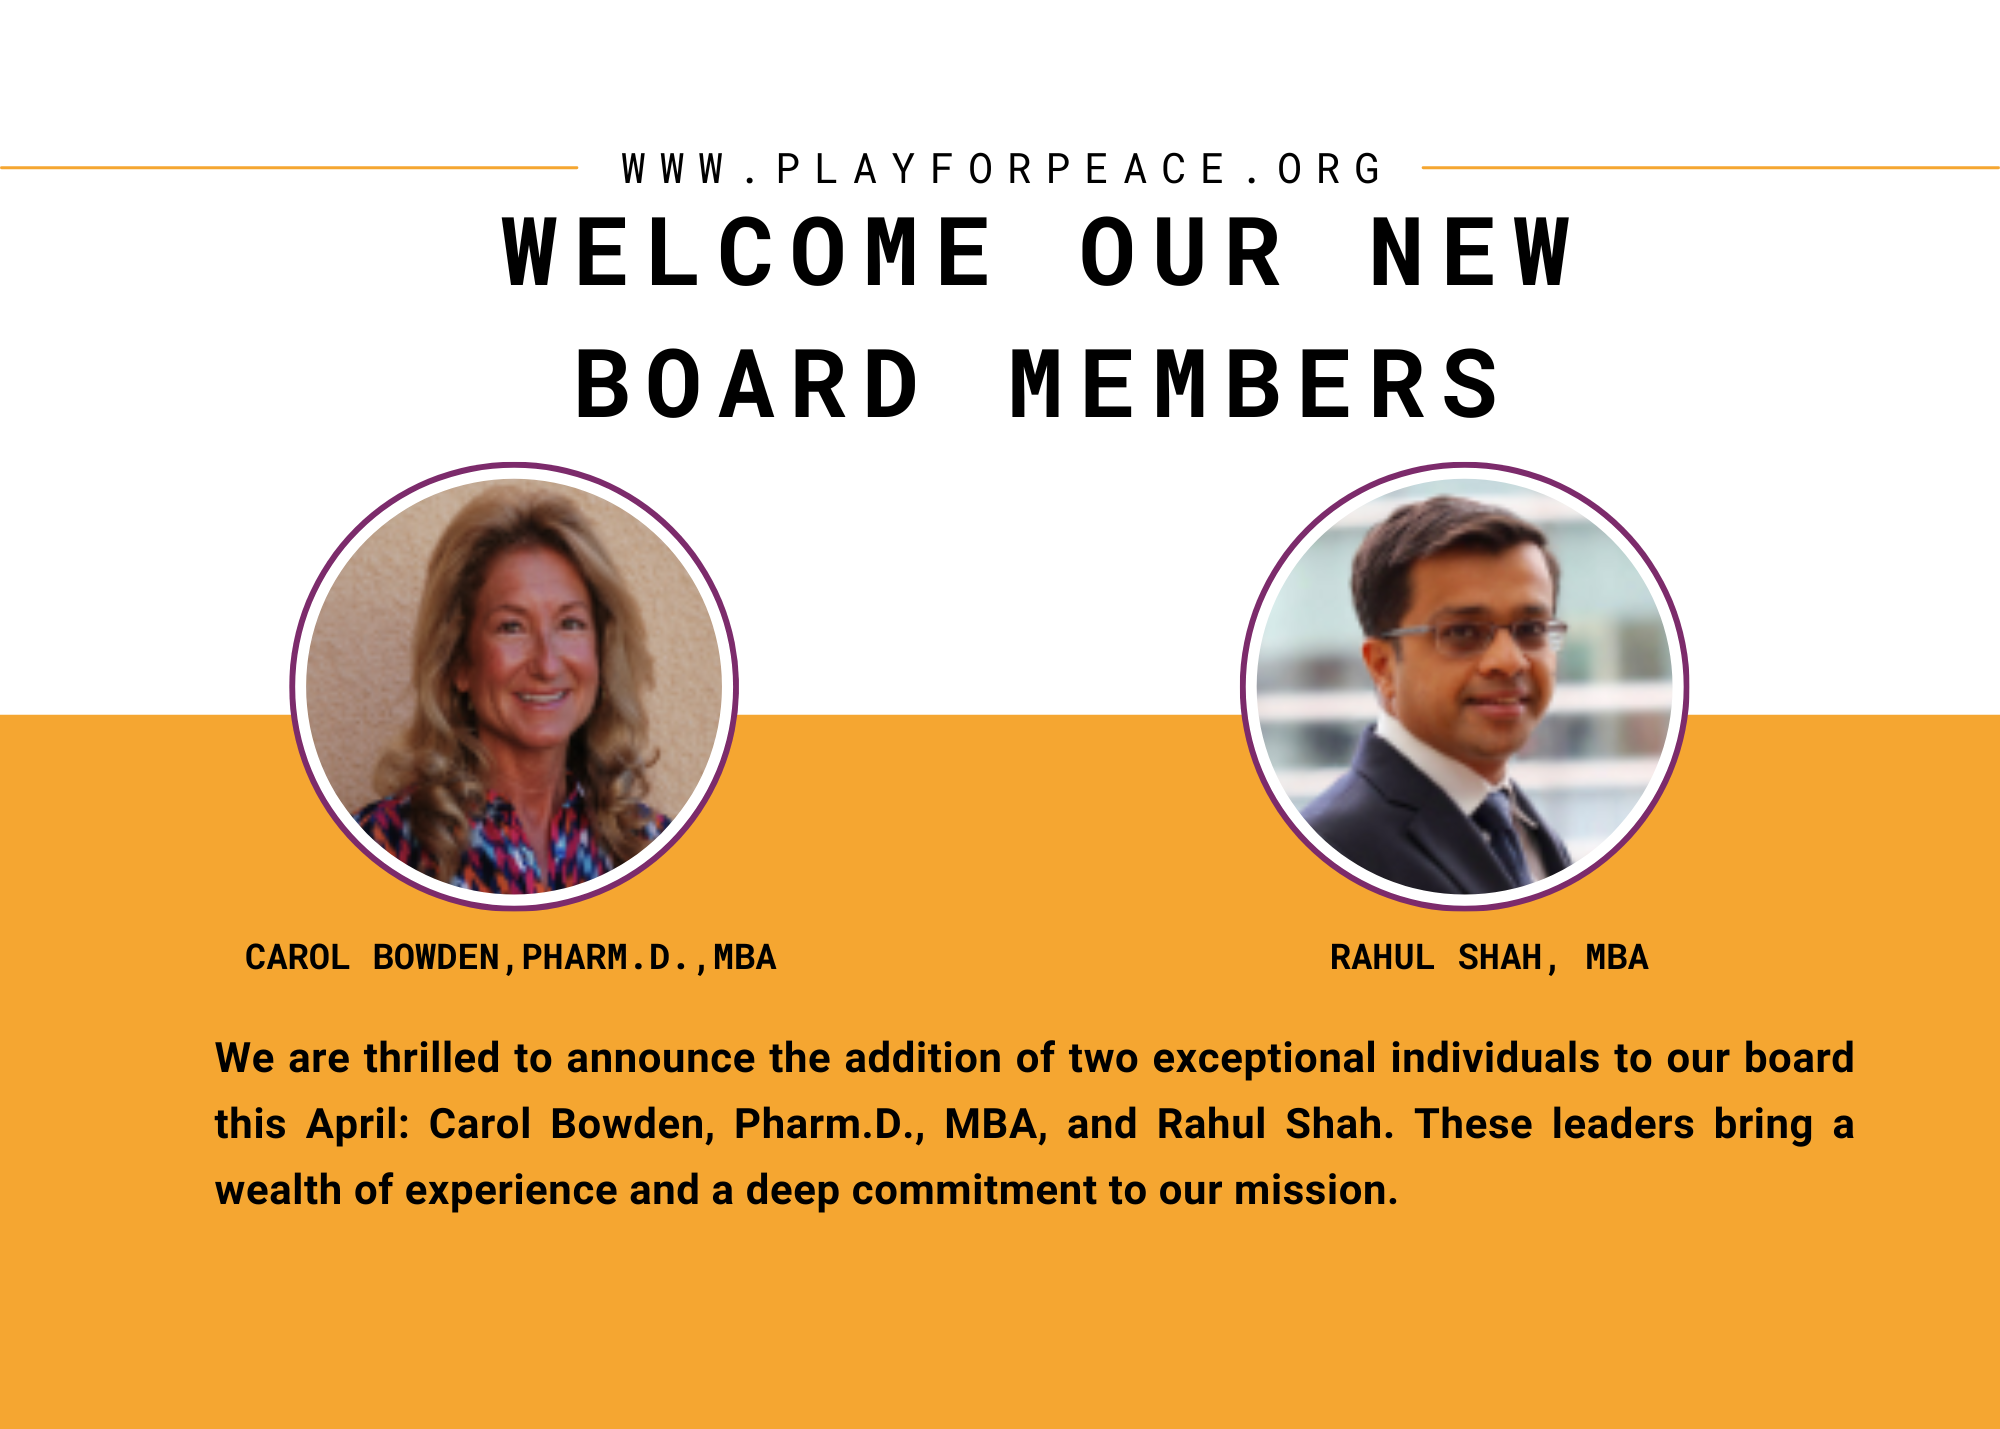 Welcome Our New Board Members: Carol Bowden and Rahul Shah